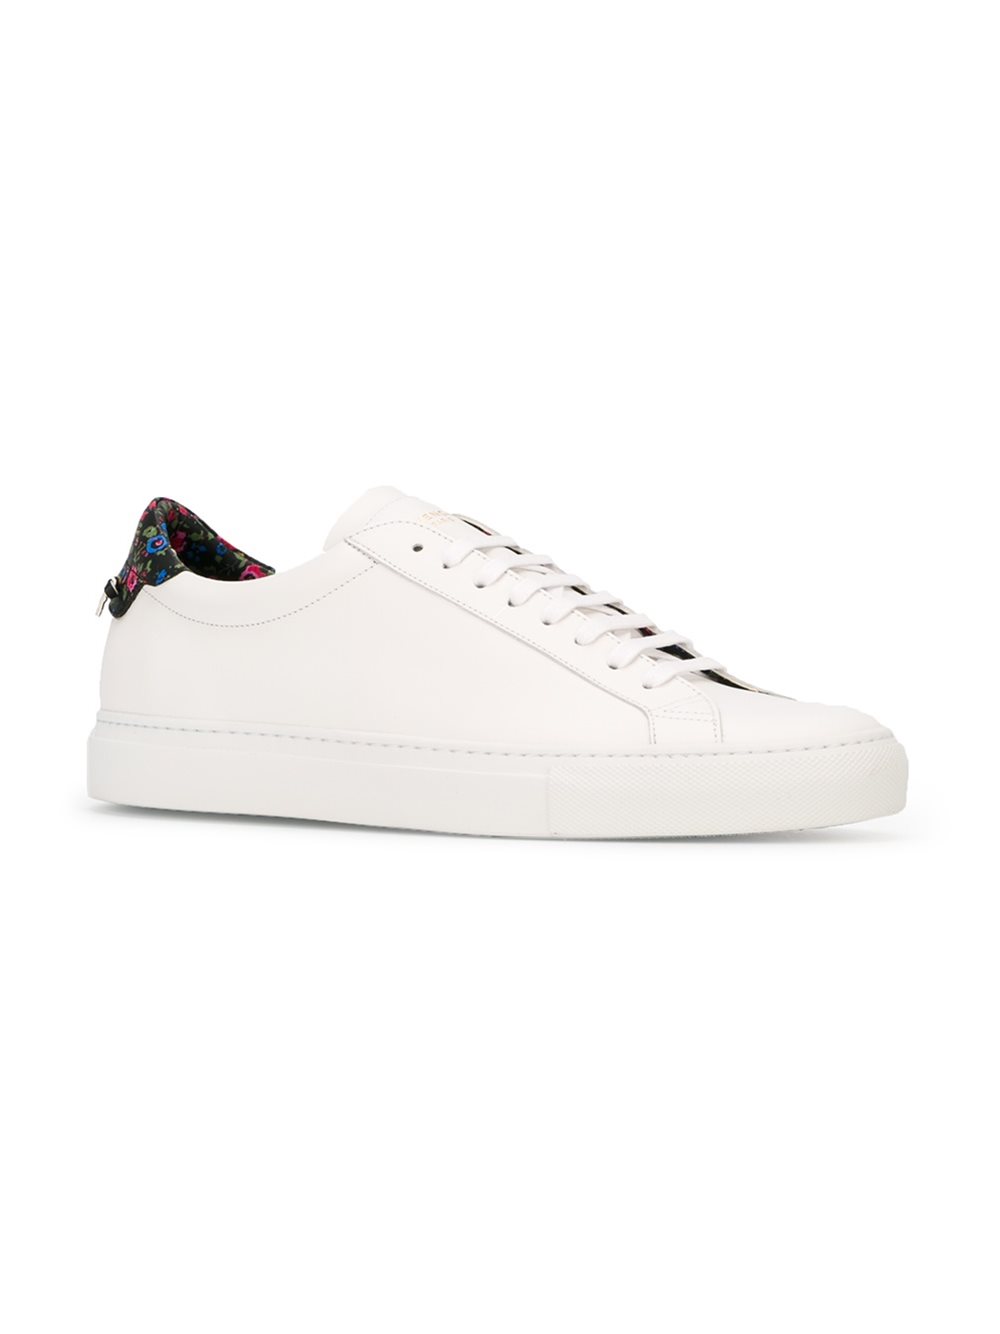 Spring Low, Year Round: Givenchy Urban Street Low-Top Sneakers ...